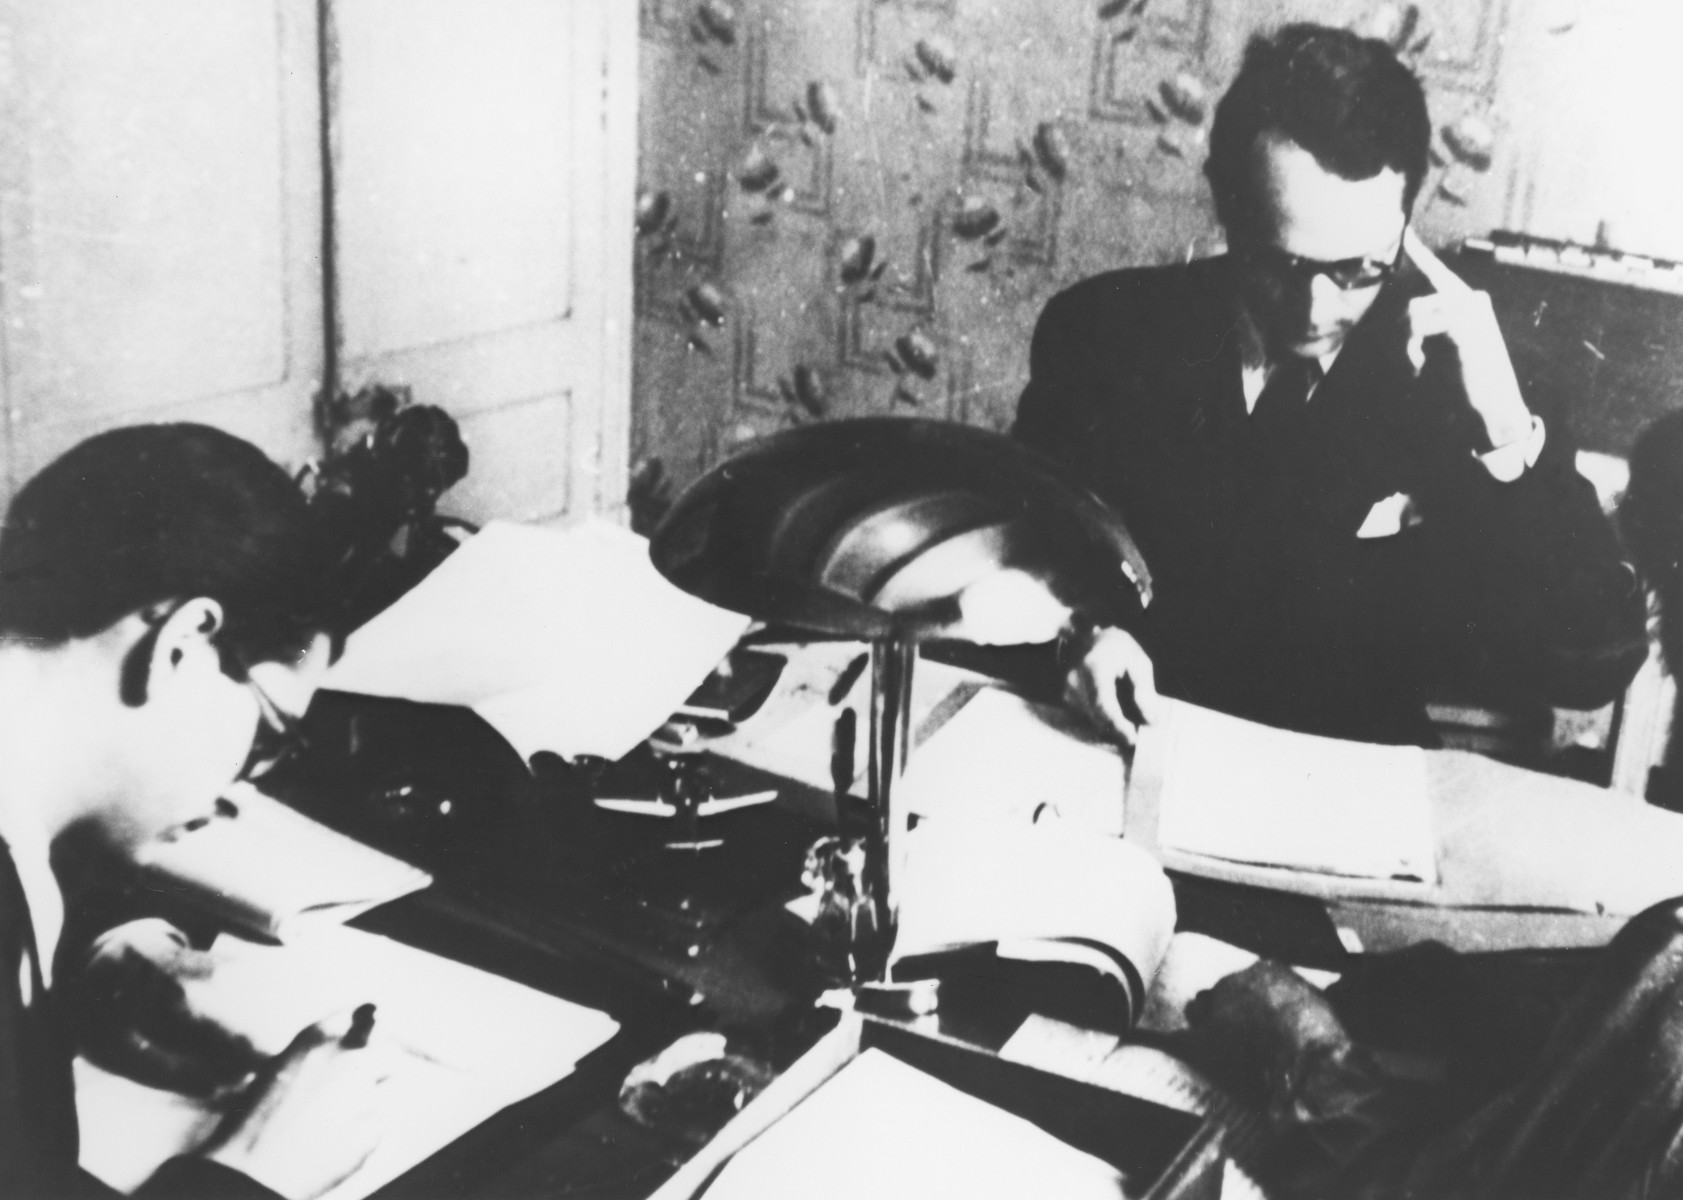 Varian Fry seated at his desk in the offices of the Centre Americain de Secours.